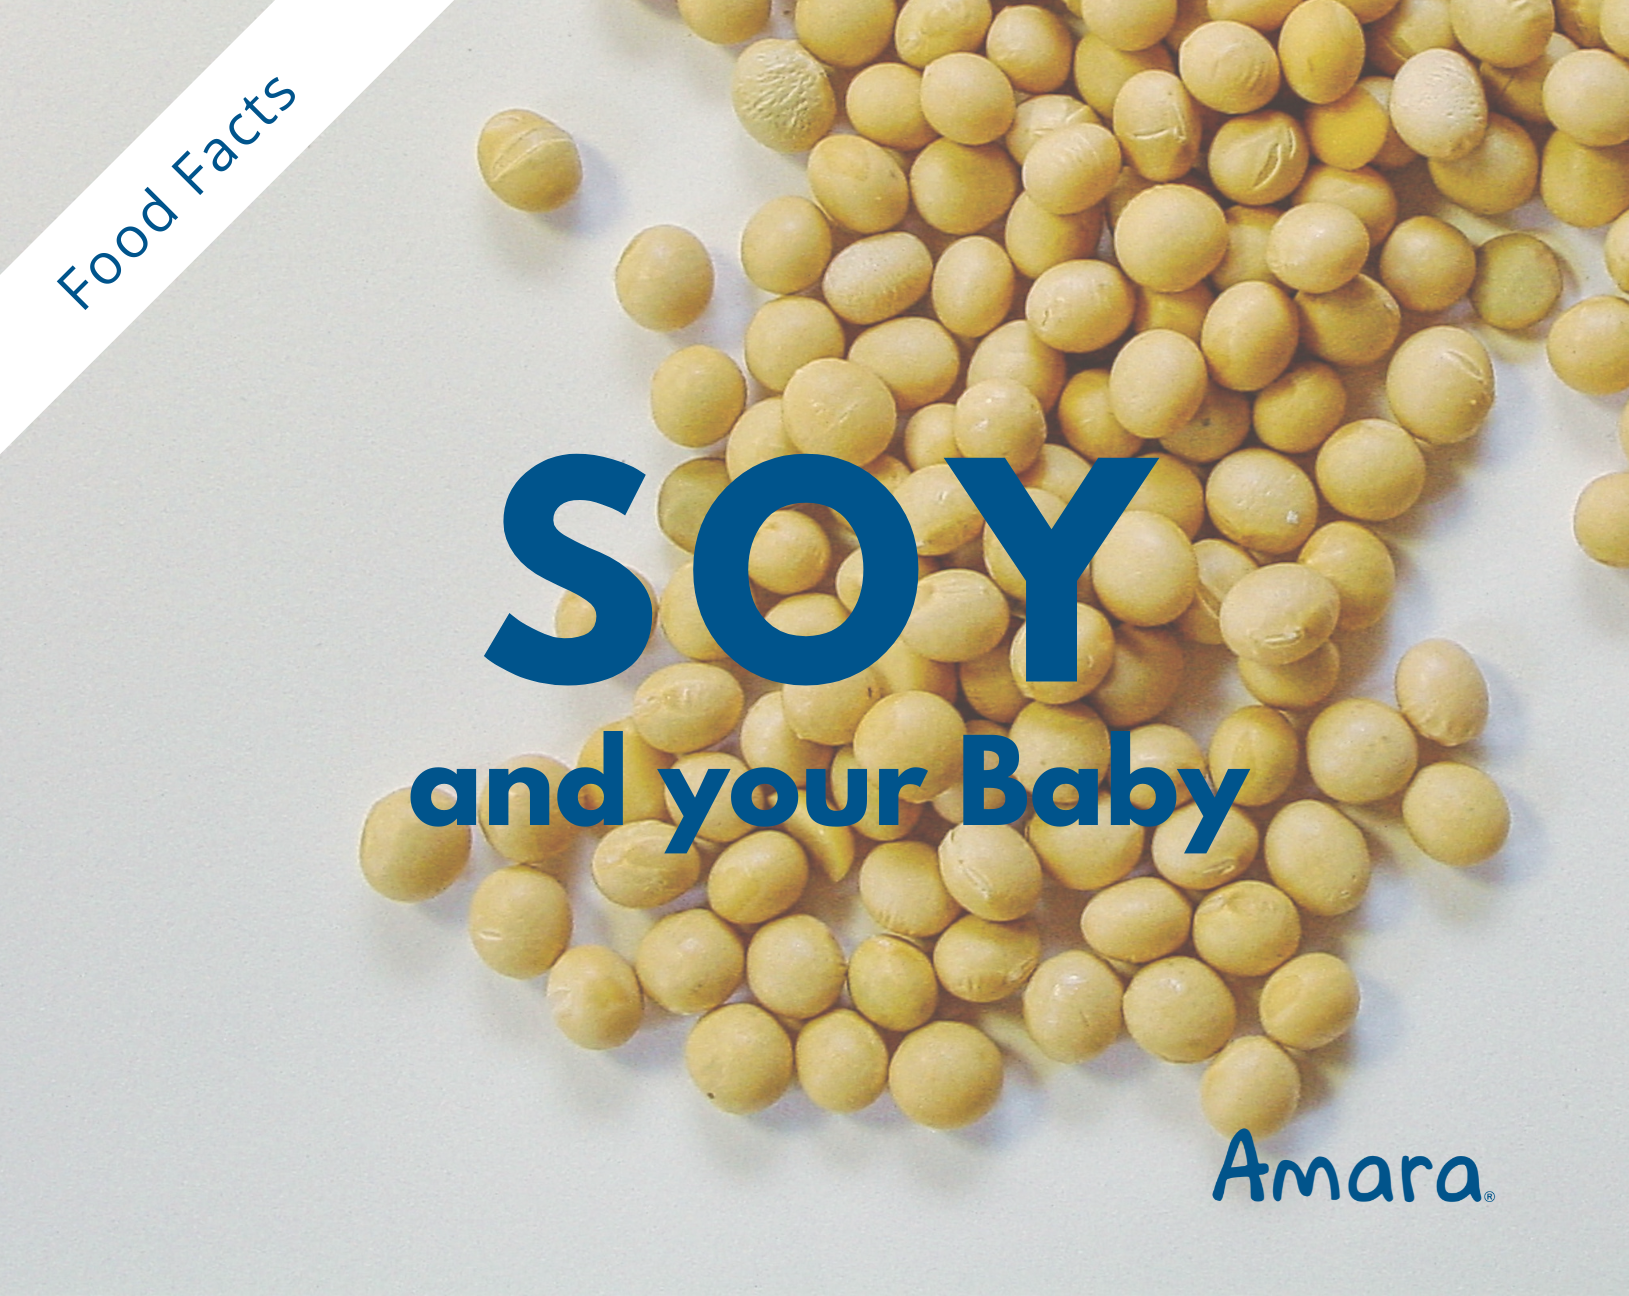 can my baby eat soy?